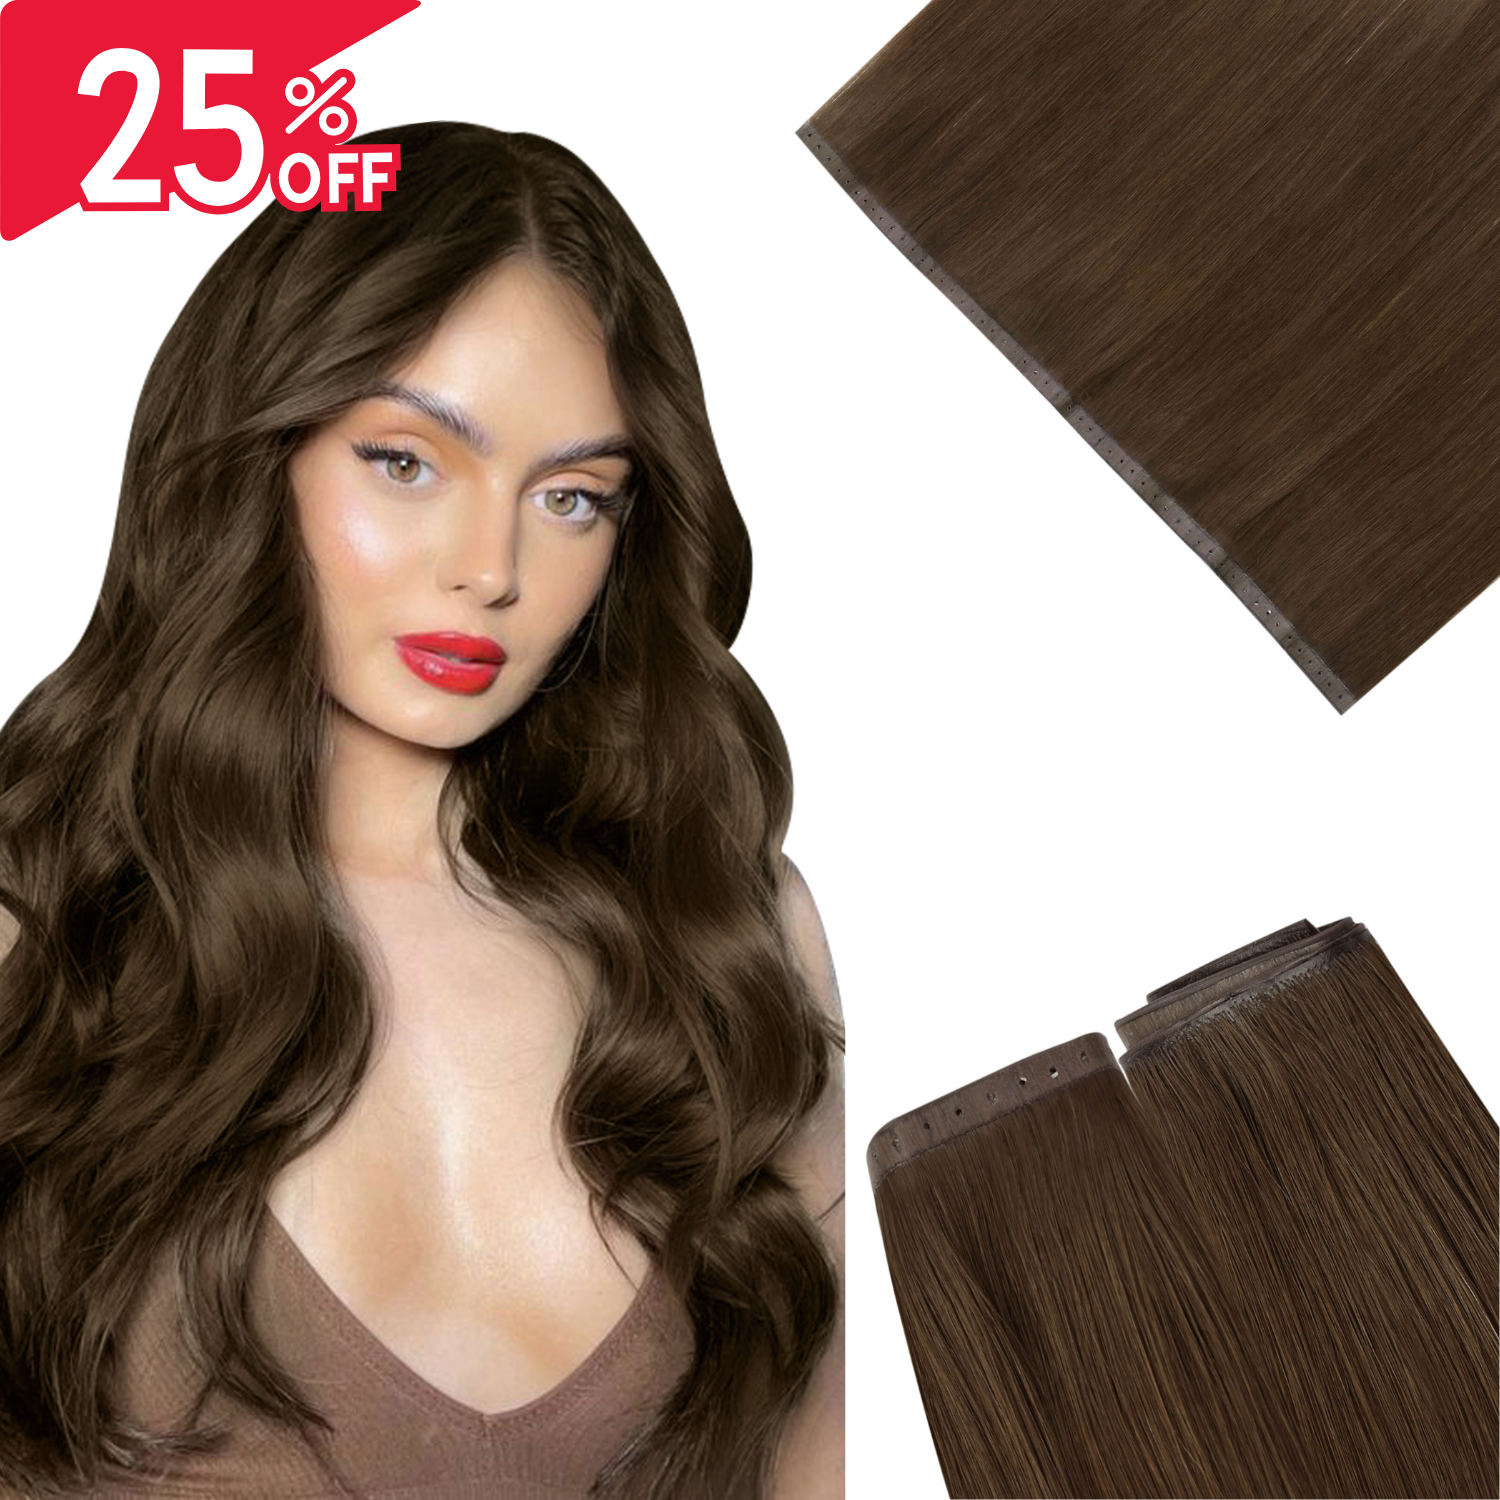 hair extensions,weft hair extensions,sew in weft hair extensions,XO Invisible weft,XO hair extensions,xo invisible weft extensions,pu wefts hair extensions,18 inch hair extensions,pu hole invisible wefts,brown hair extensions